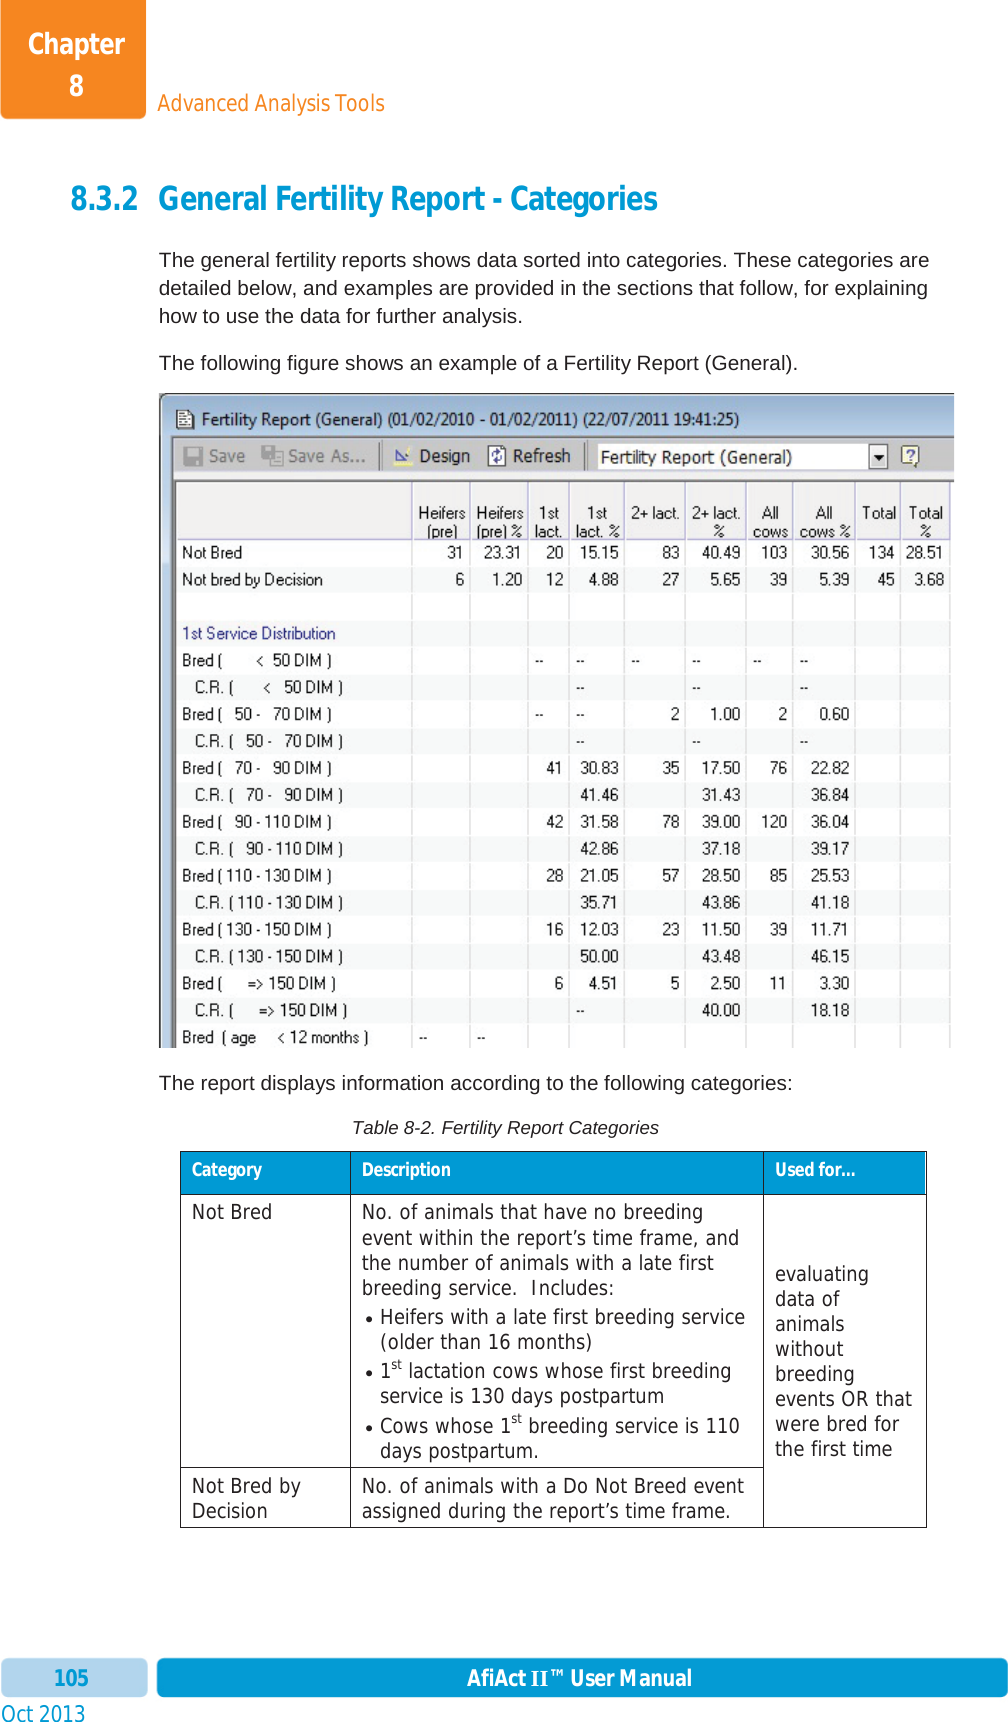 Oct 2013 AfiAct II™ User Manual105Advanced Analysis ToolsChapter 88.3.2 General Fertility Report - Categories The general fertility reports shows data sorted into categories. These categories are detailed below, and examples are provided in the sections that follow, for explaining how to use the data for further analysis. The following figure shows an example of a Fertility Report (General). The report displays information according to the following categories:  Table 8-2. Fertility Report Categories Category  Description  Used for… Not Bred  No. of animals that have no breeding event within the report’s time frame, and the number of animals with a late first breeding service.  Includes: xHeifers with a late first breeding service (older than 16 months)x1st lactation cows whose first breeding service is 130 days postpartumxCows whose 1st breeding service is 110 days postpartum.evaluating data of animals without breedingevents OR that were bred for the first time Not Bred by Decision  No. of animals with a Do Not Breed event assigned during the report’s time frame. 